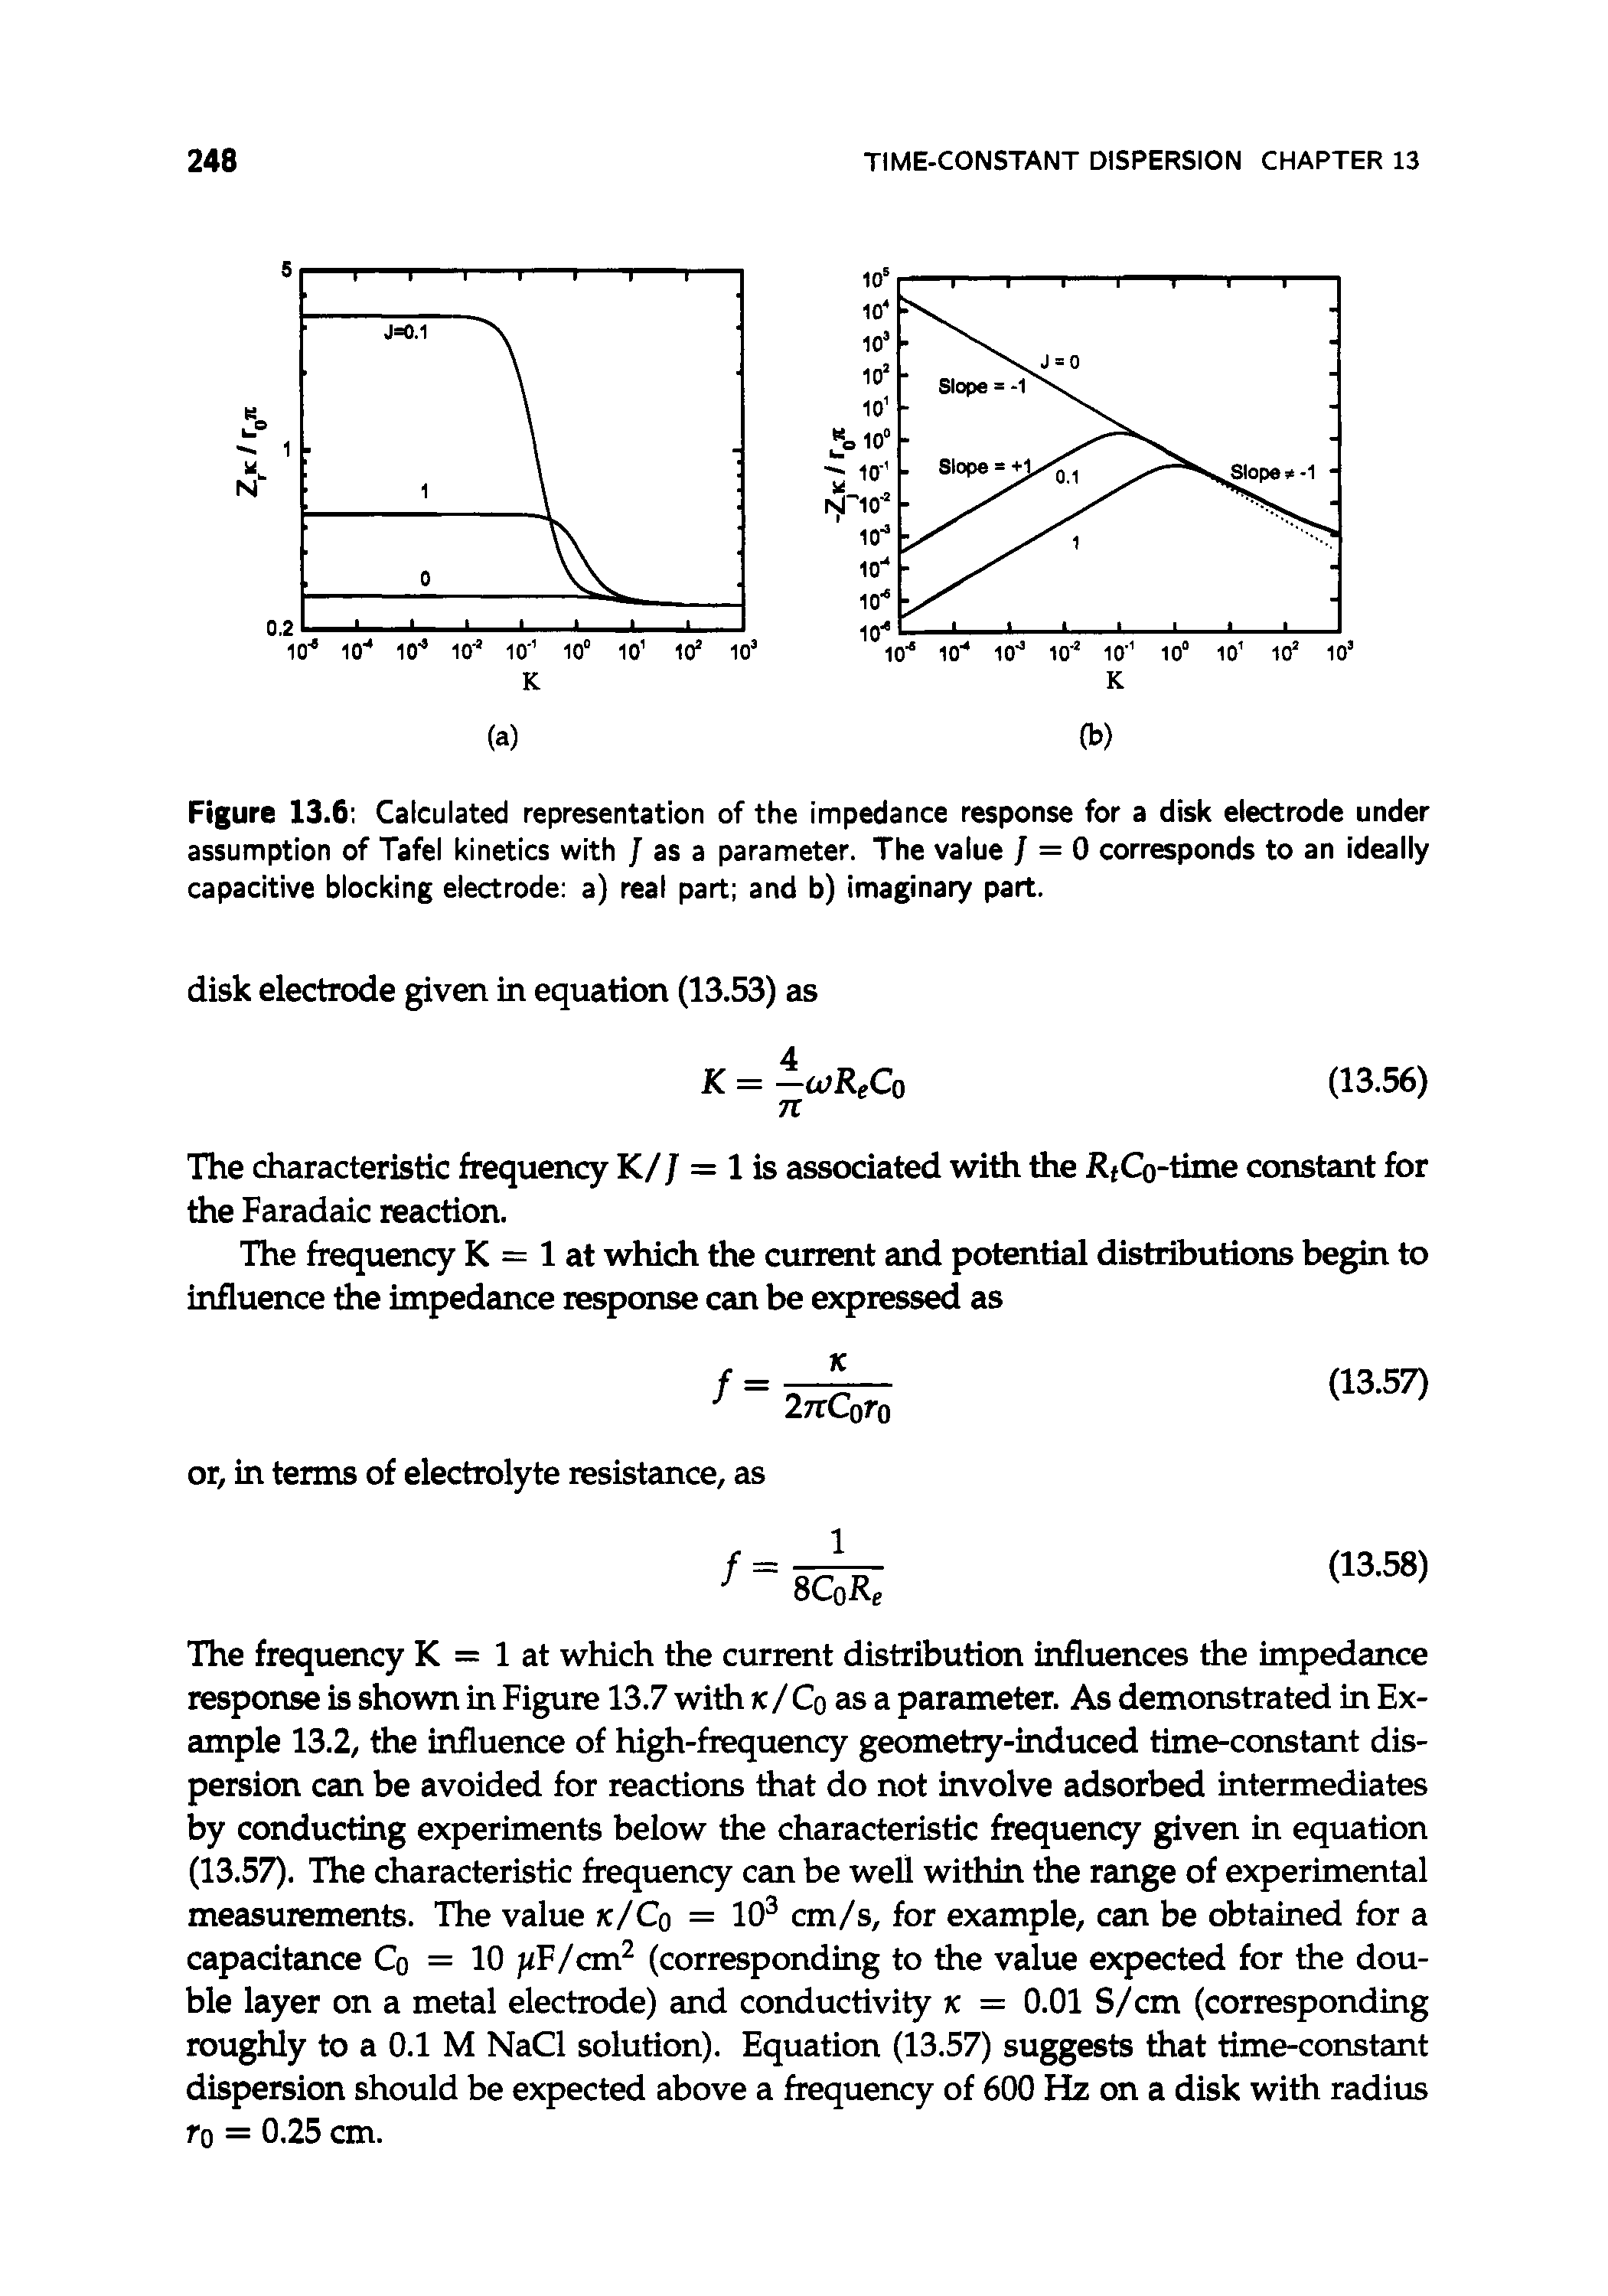 Figure 13.6 Calculated representation of the impedance response for a disk electrode under assumption of Tafel kinetics with / as a parameter. The value / = 0 corresponds to an ideally capacitive blocking electrode a) real part and b) imaginary part.